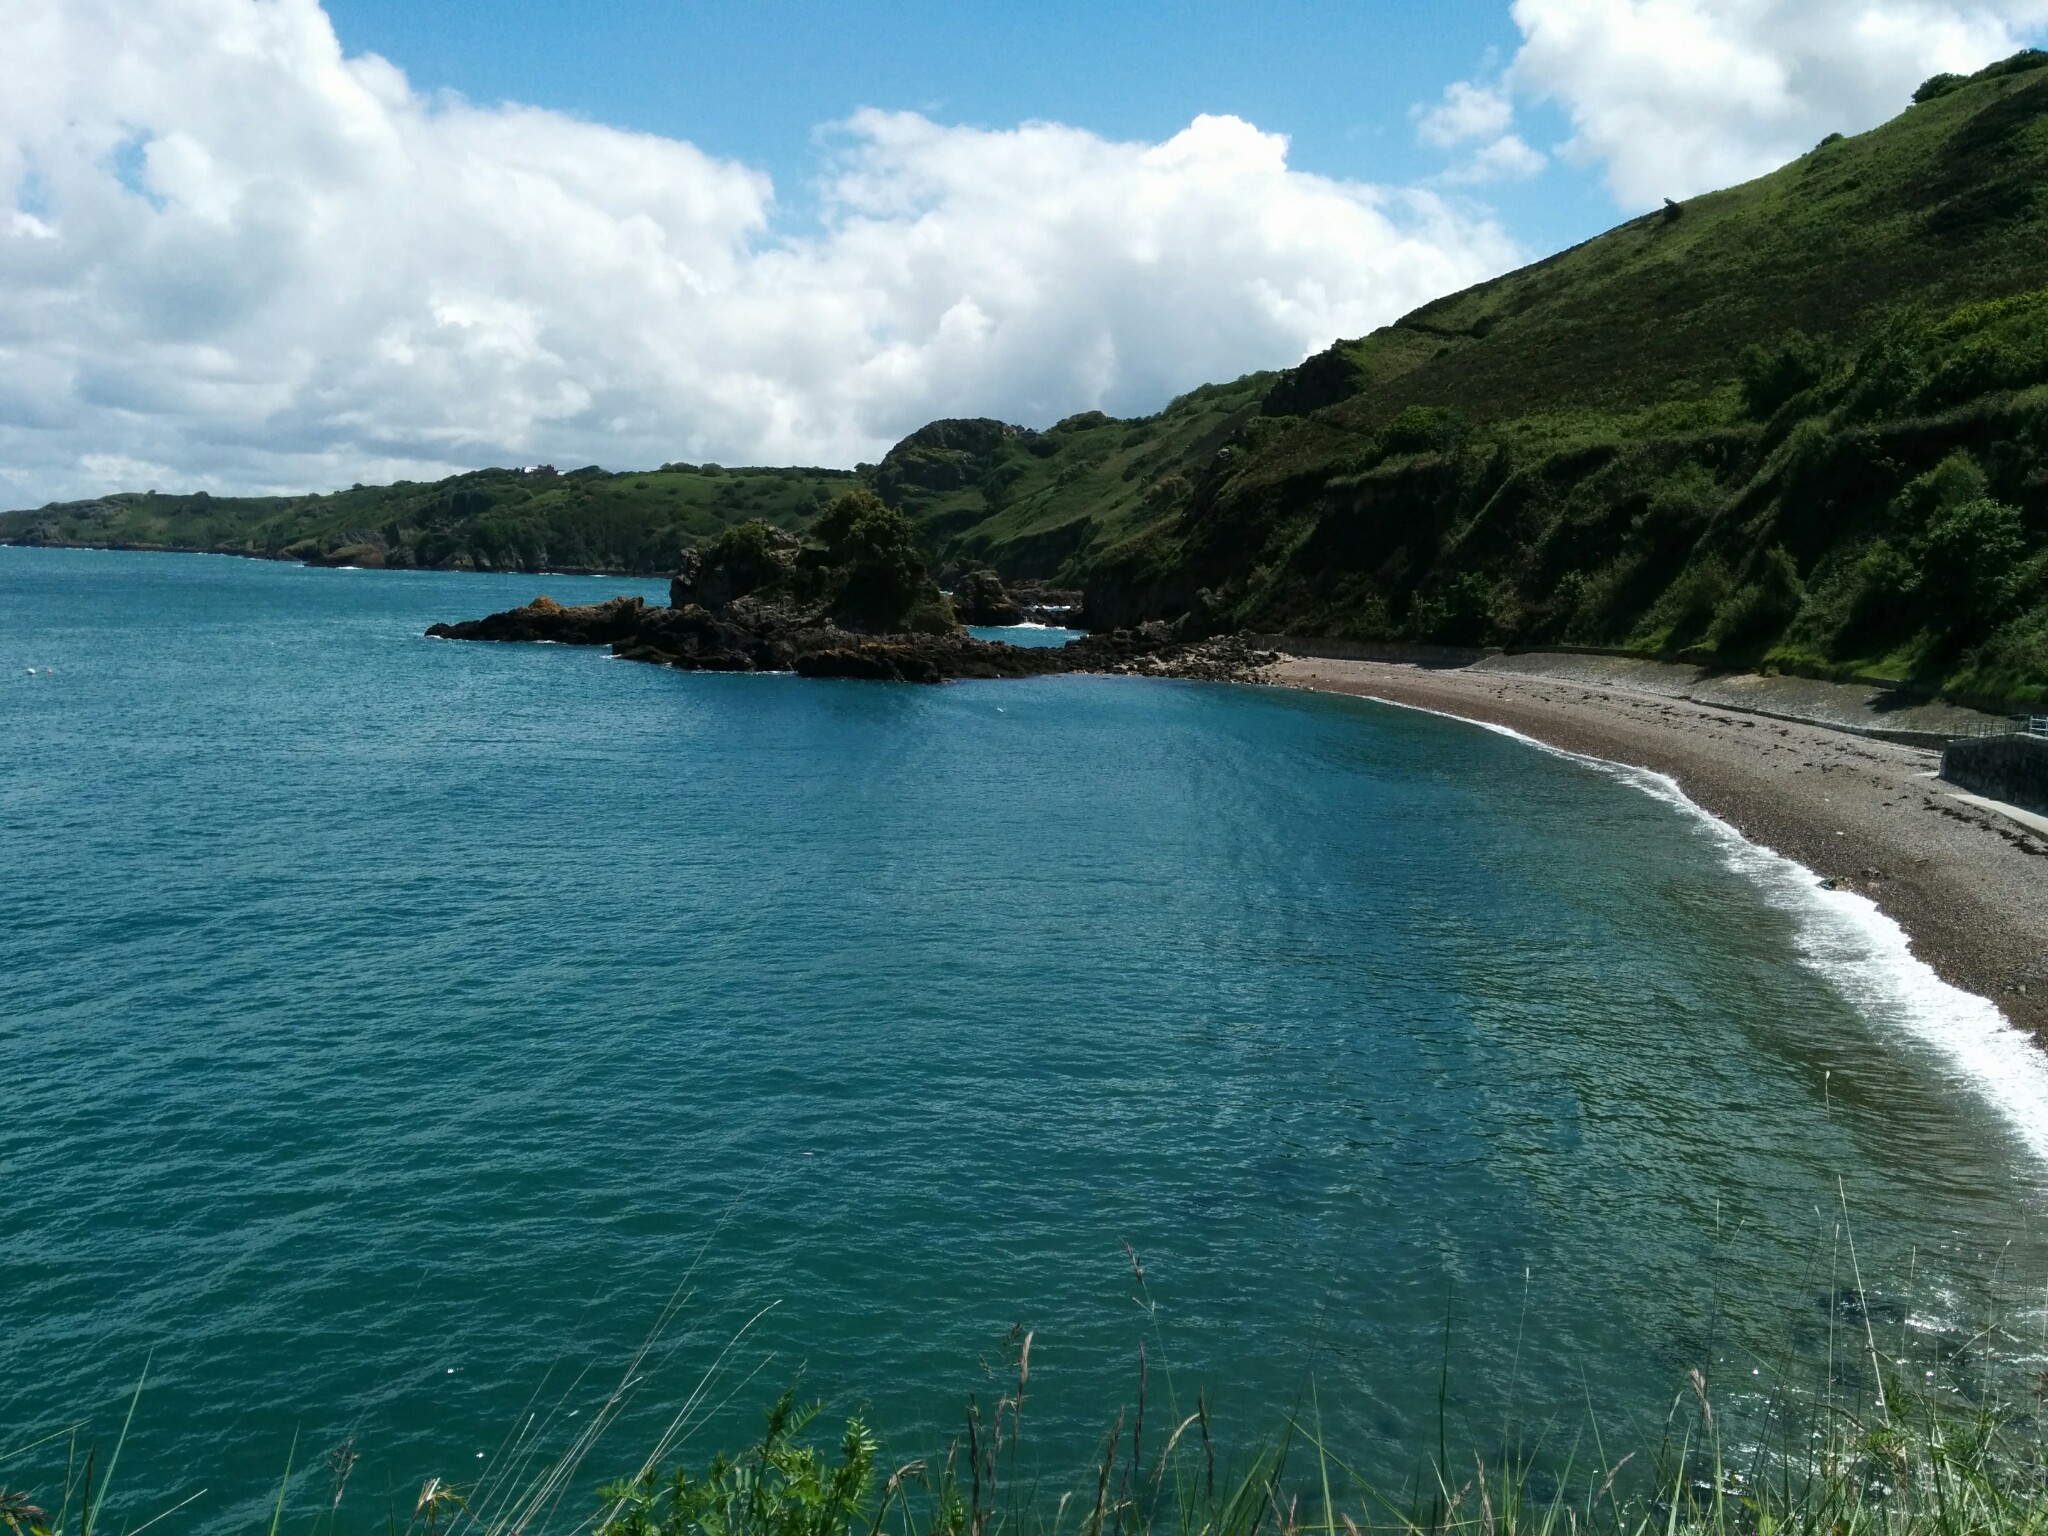 Bouley Bay, north Jersey.﻿ My new phone takes considerably better pictures than my old one. :)